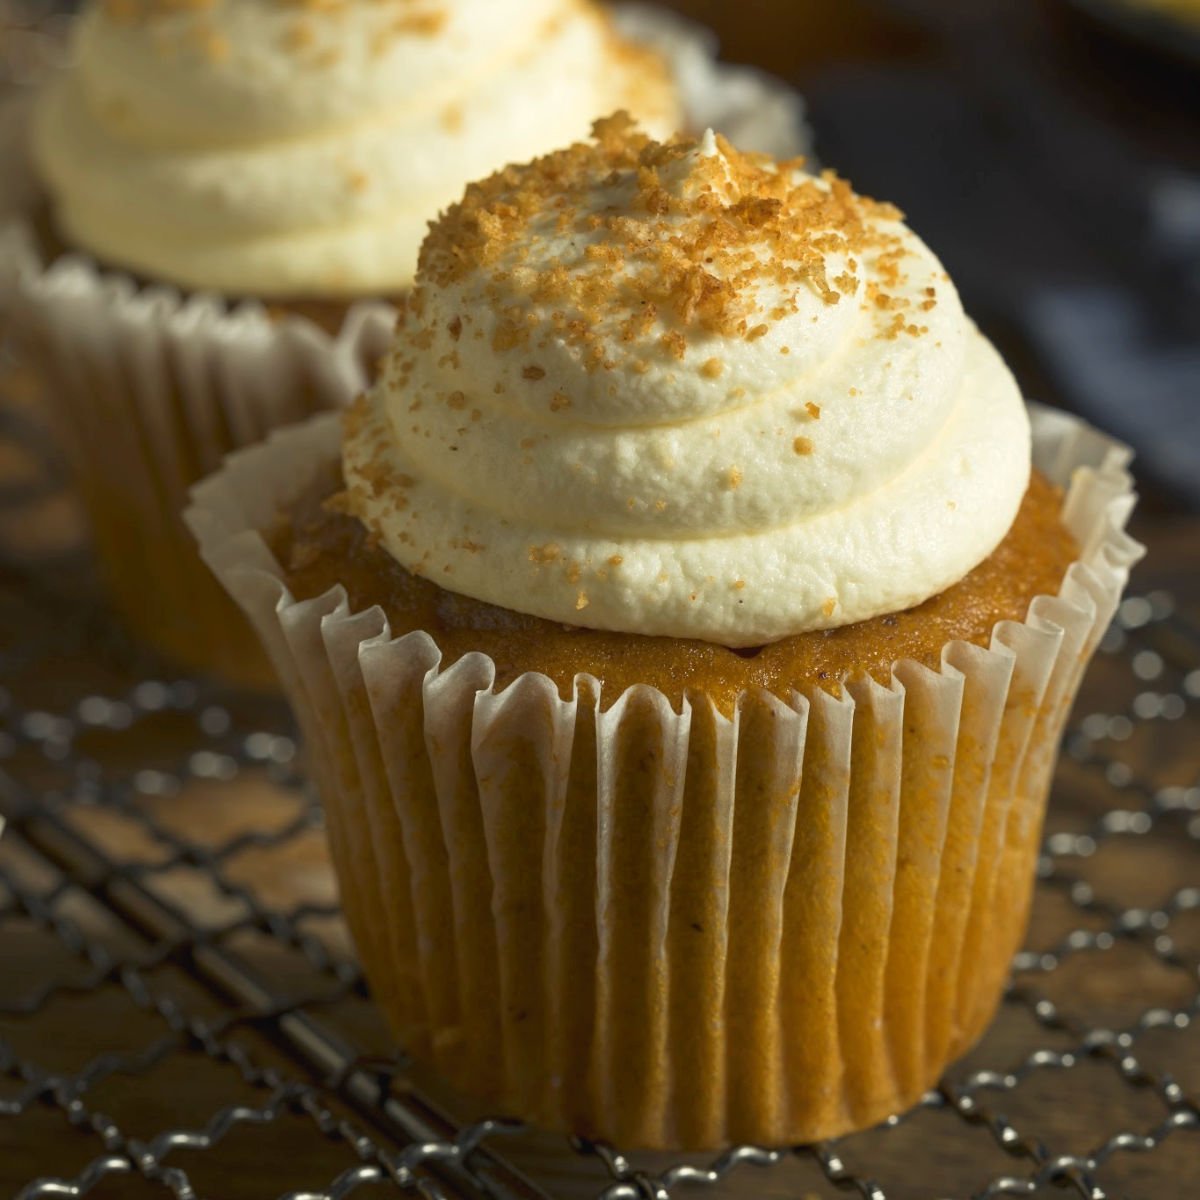 Spice cupcake with fluffy white frosting.